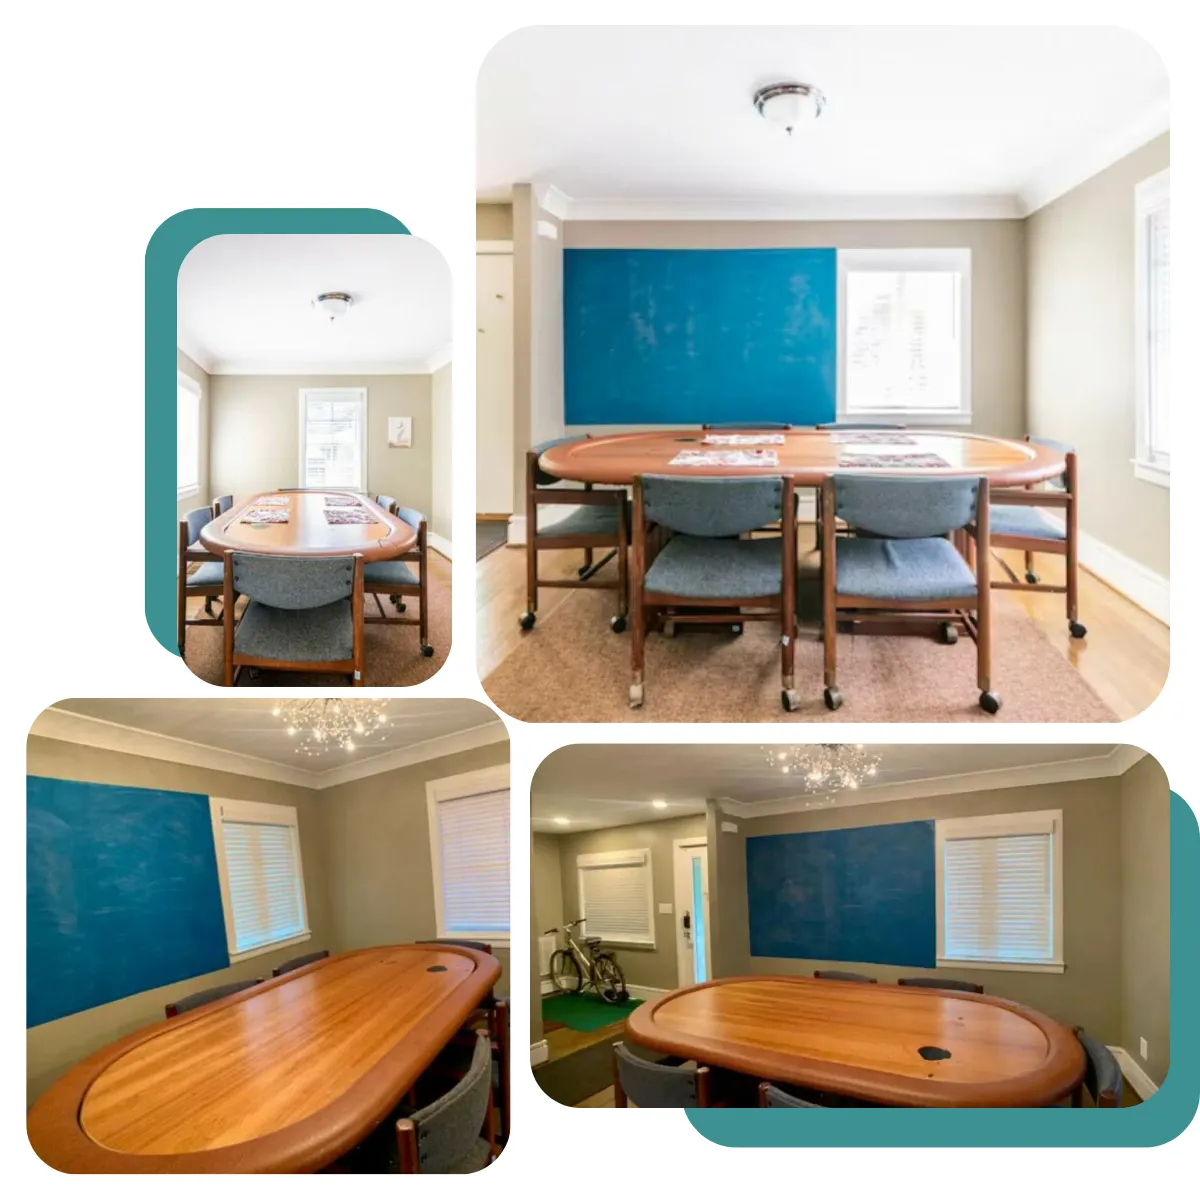 Uptown Cozy Rental's dining area is designed for enjoyable meals and gatherings, blending classic and modern styles for a comfortable setting where six can sit and chat."